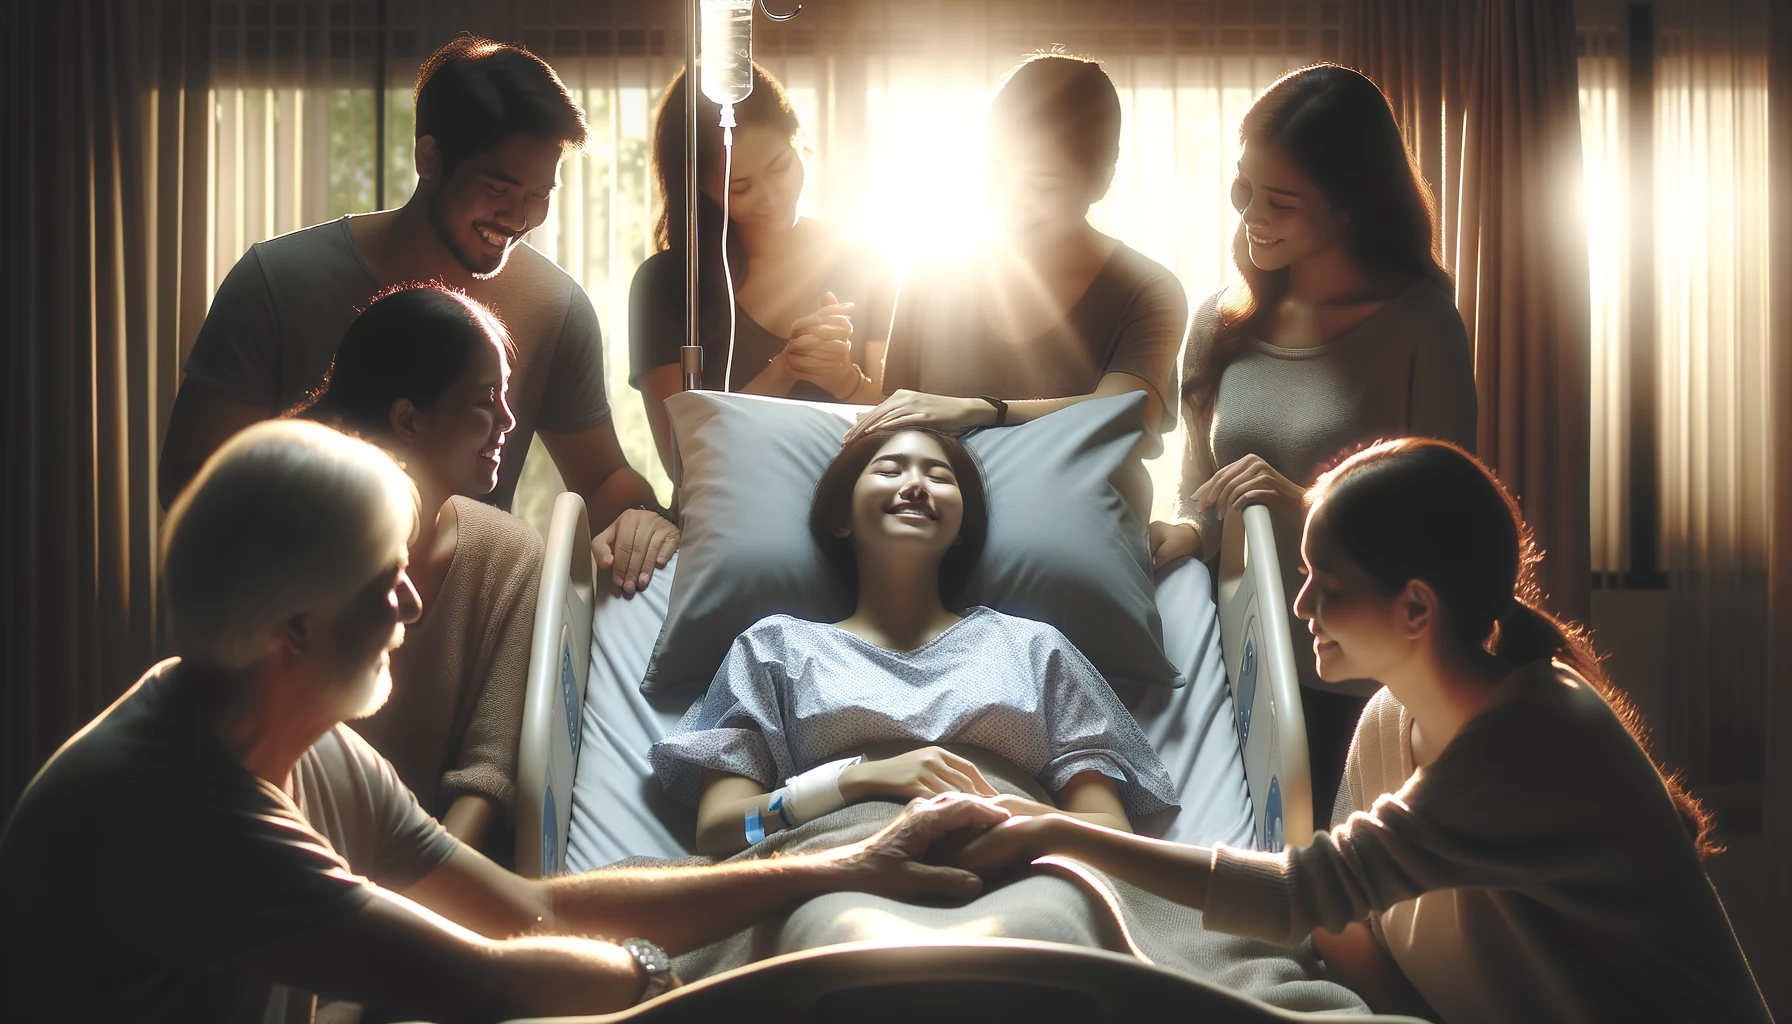 A 16_9 widescreen image depicting a heartwarming scene of a person in a hospital bed, surrounded by the support of their loved ones. The hospital room